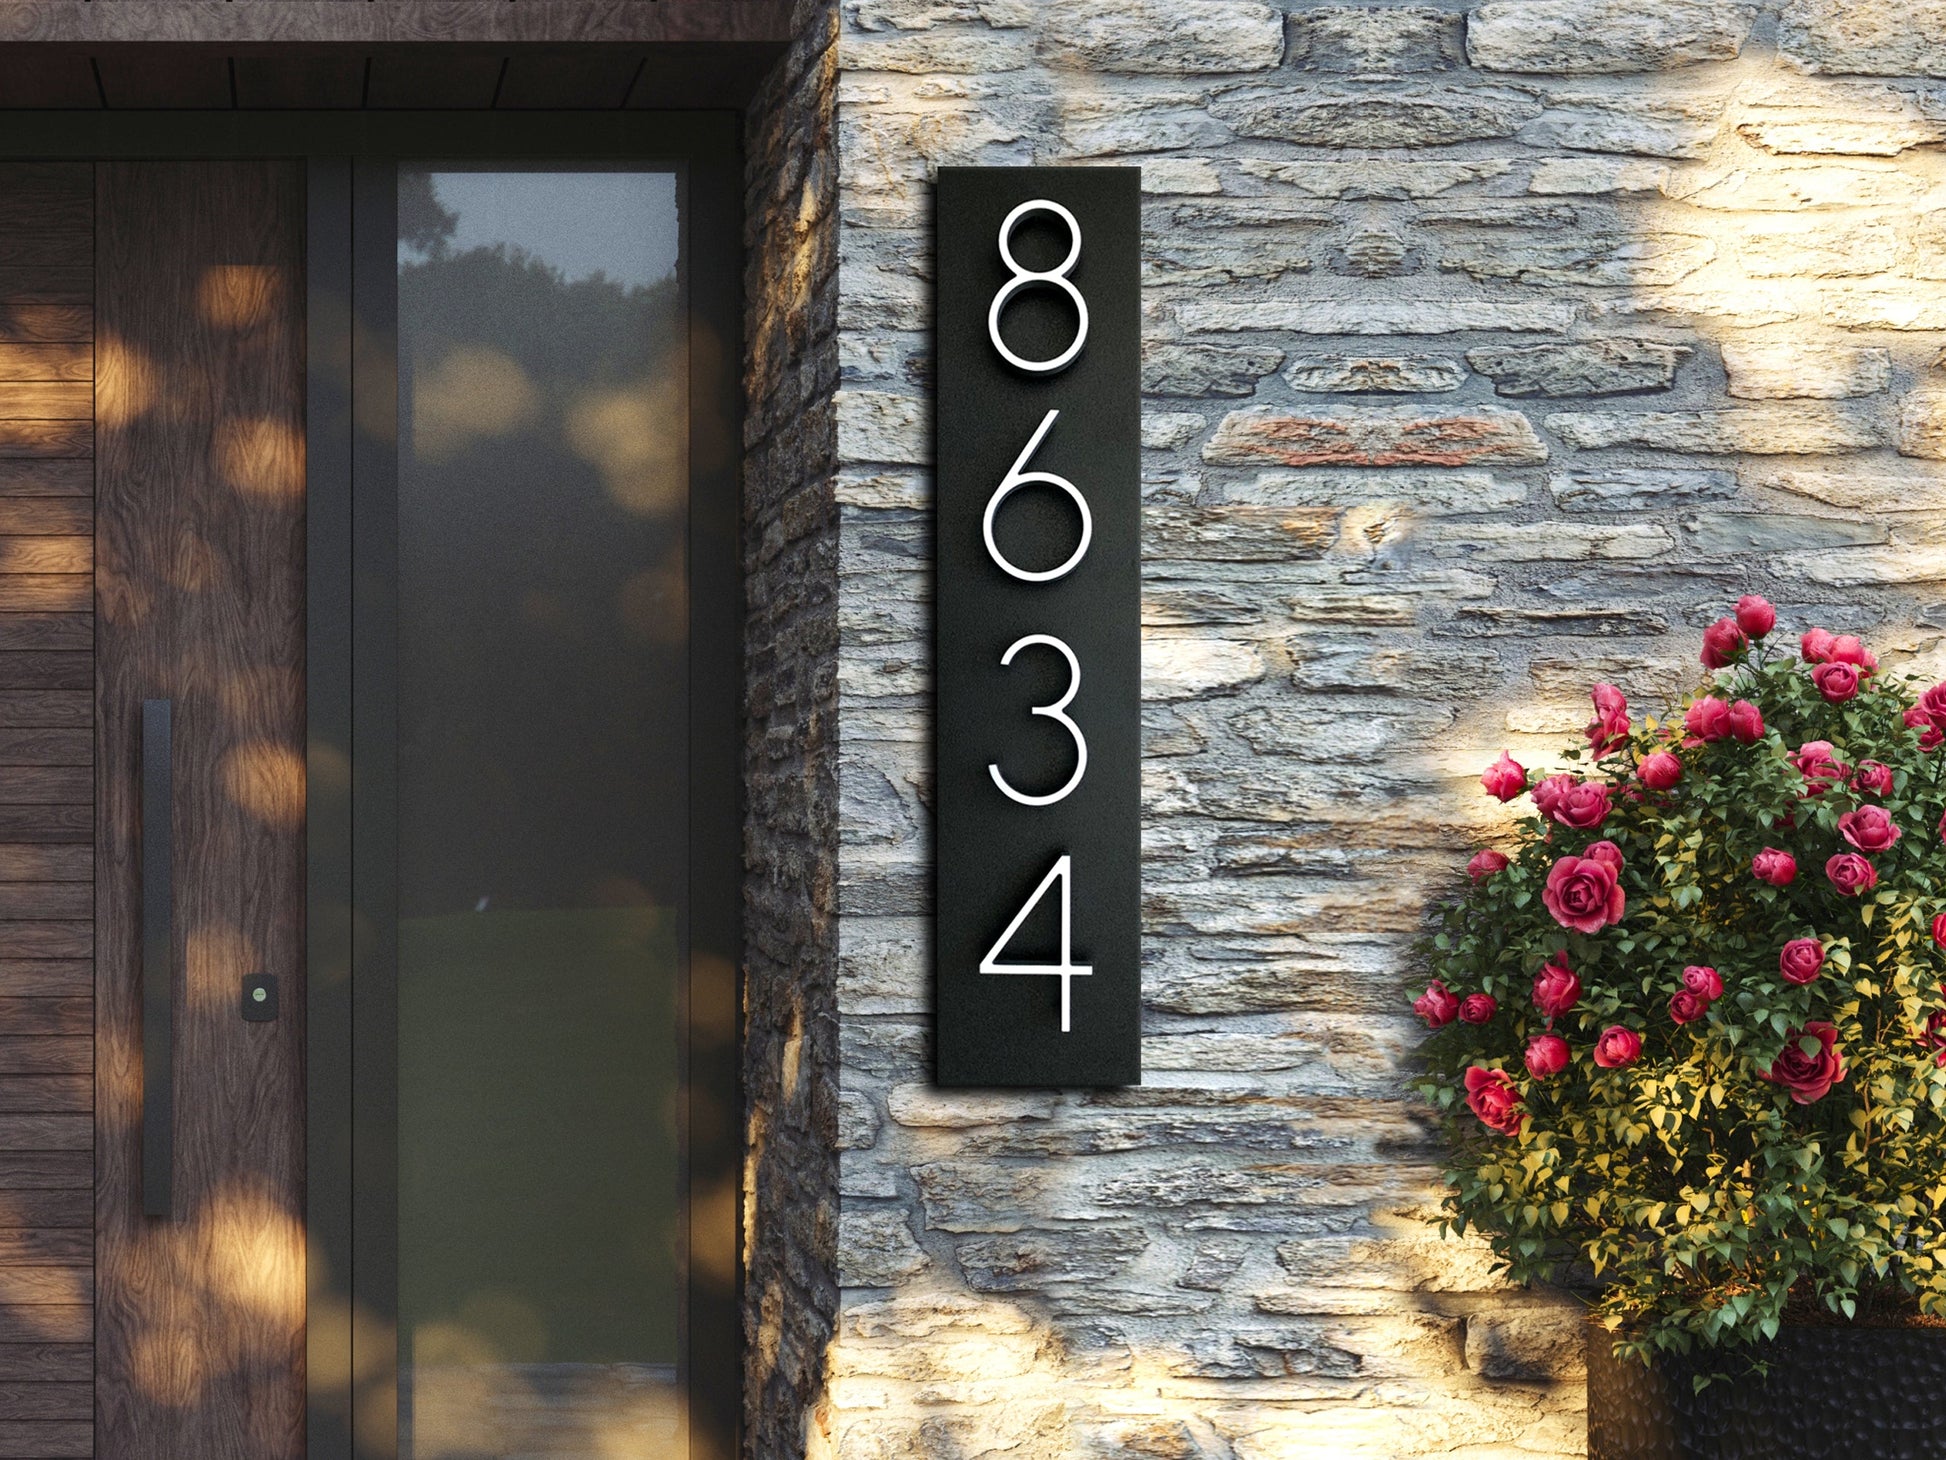 Address sign with METAL numbers available in vertical and horizontal m –  White Harmony™